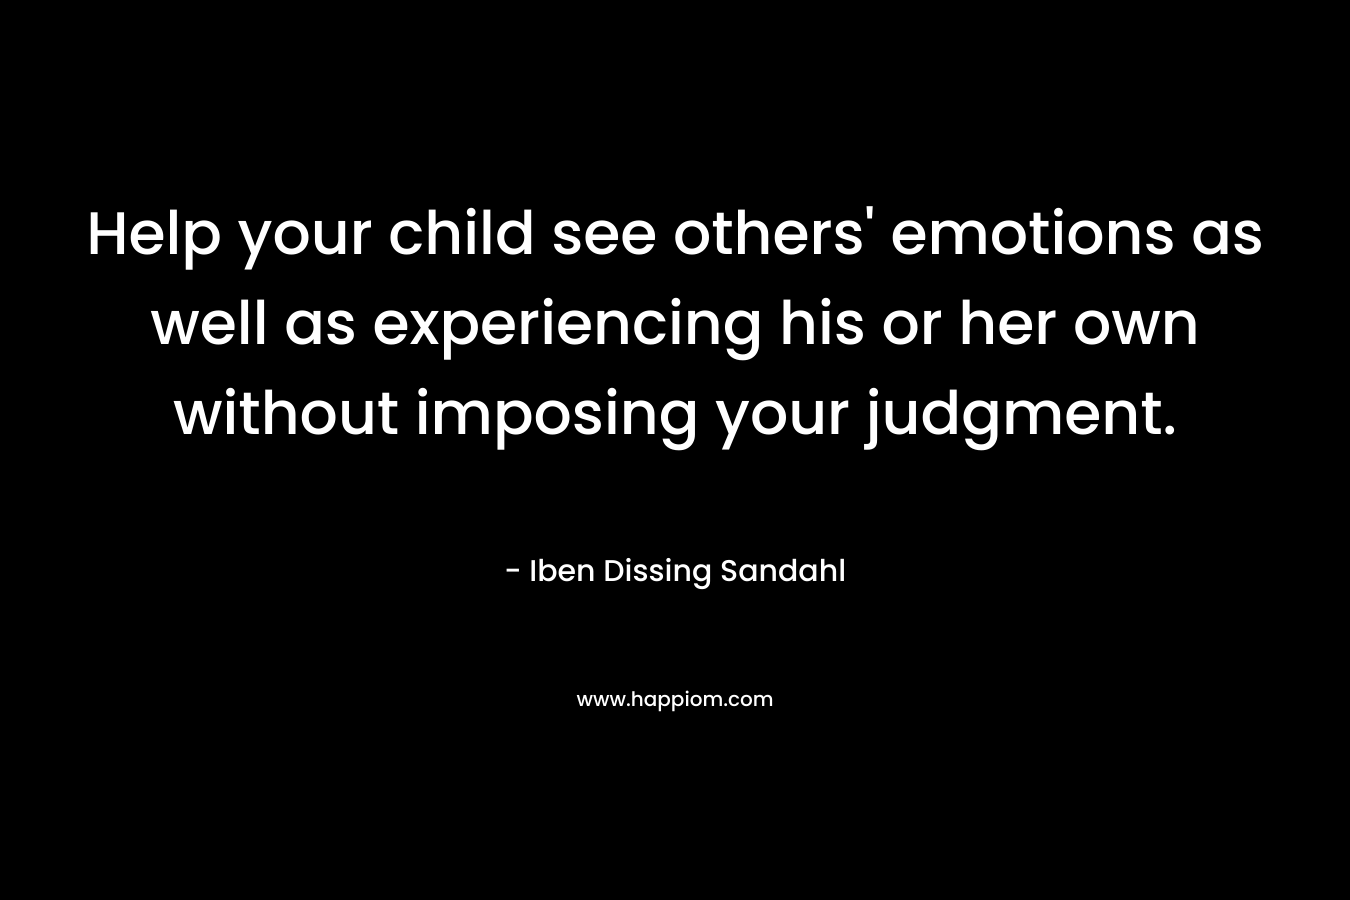 Help your child see others’ emotions as well as experiencing his or her own without imposing your judgment. – Iben Dissing Sandahl